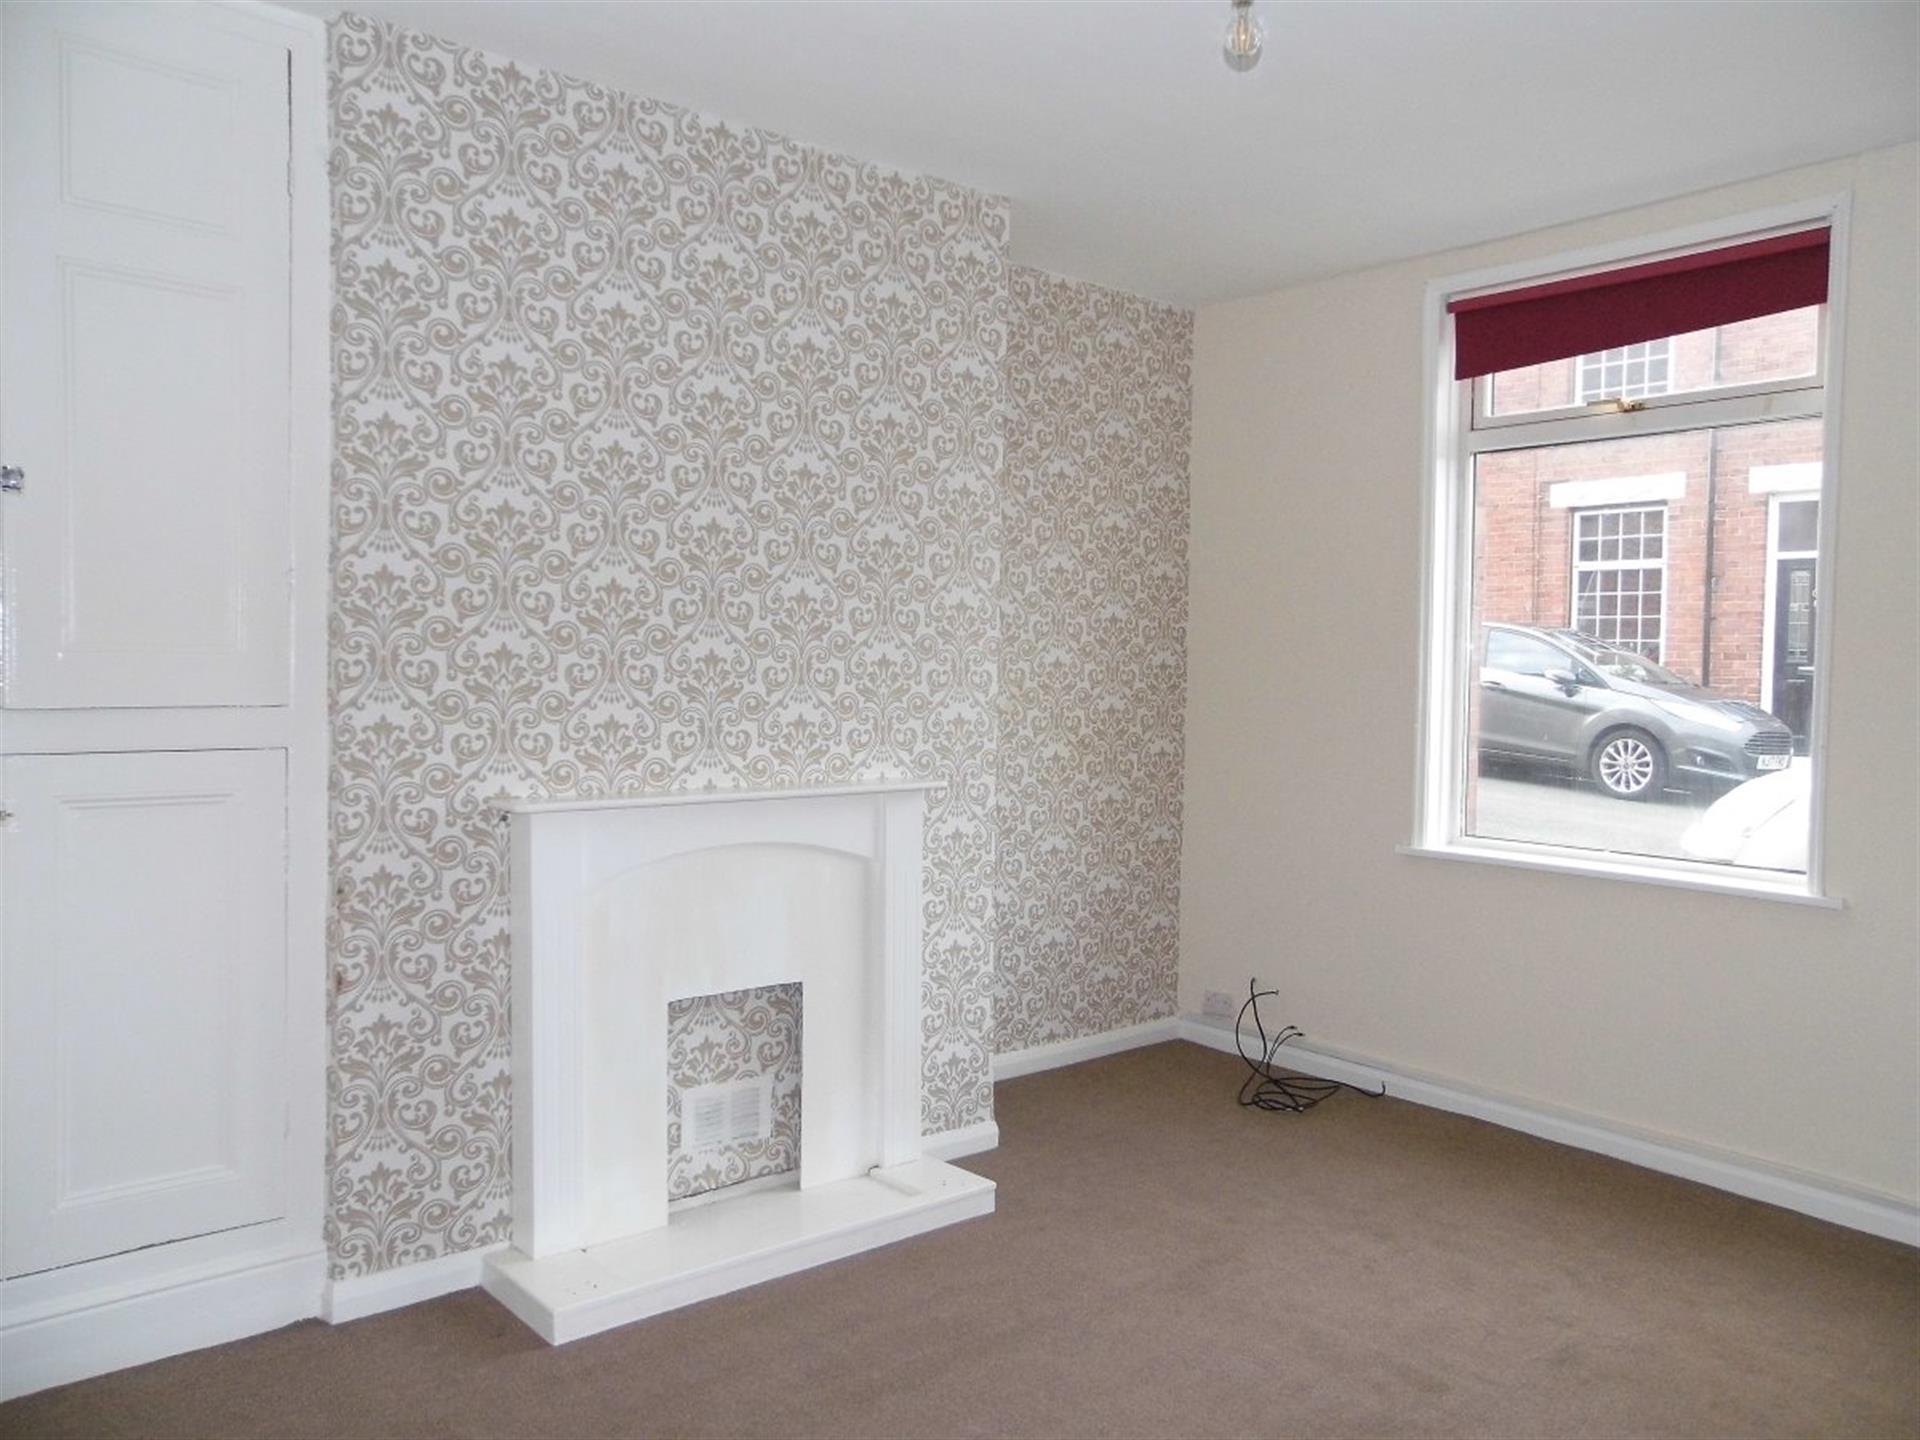 2 bedroom terraced house To Let in Co Durham - photograph 5.